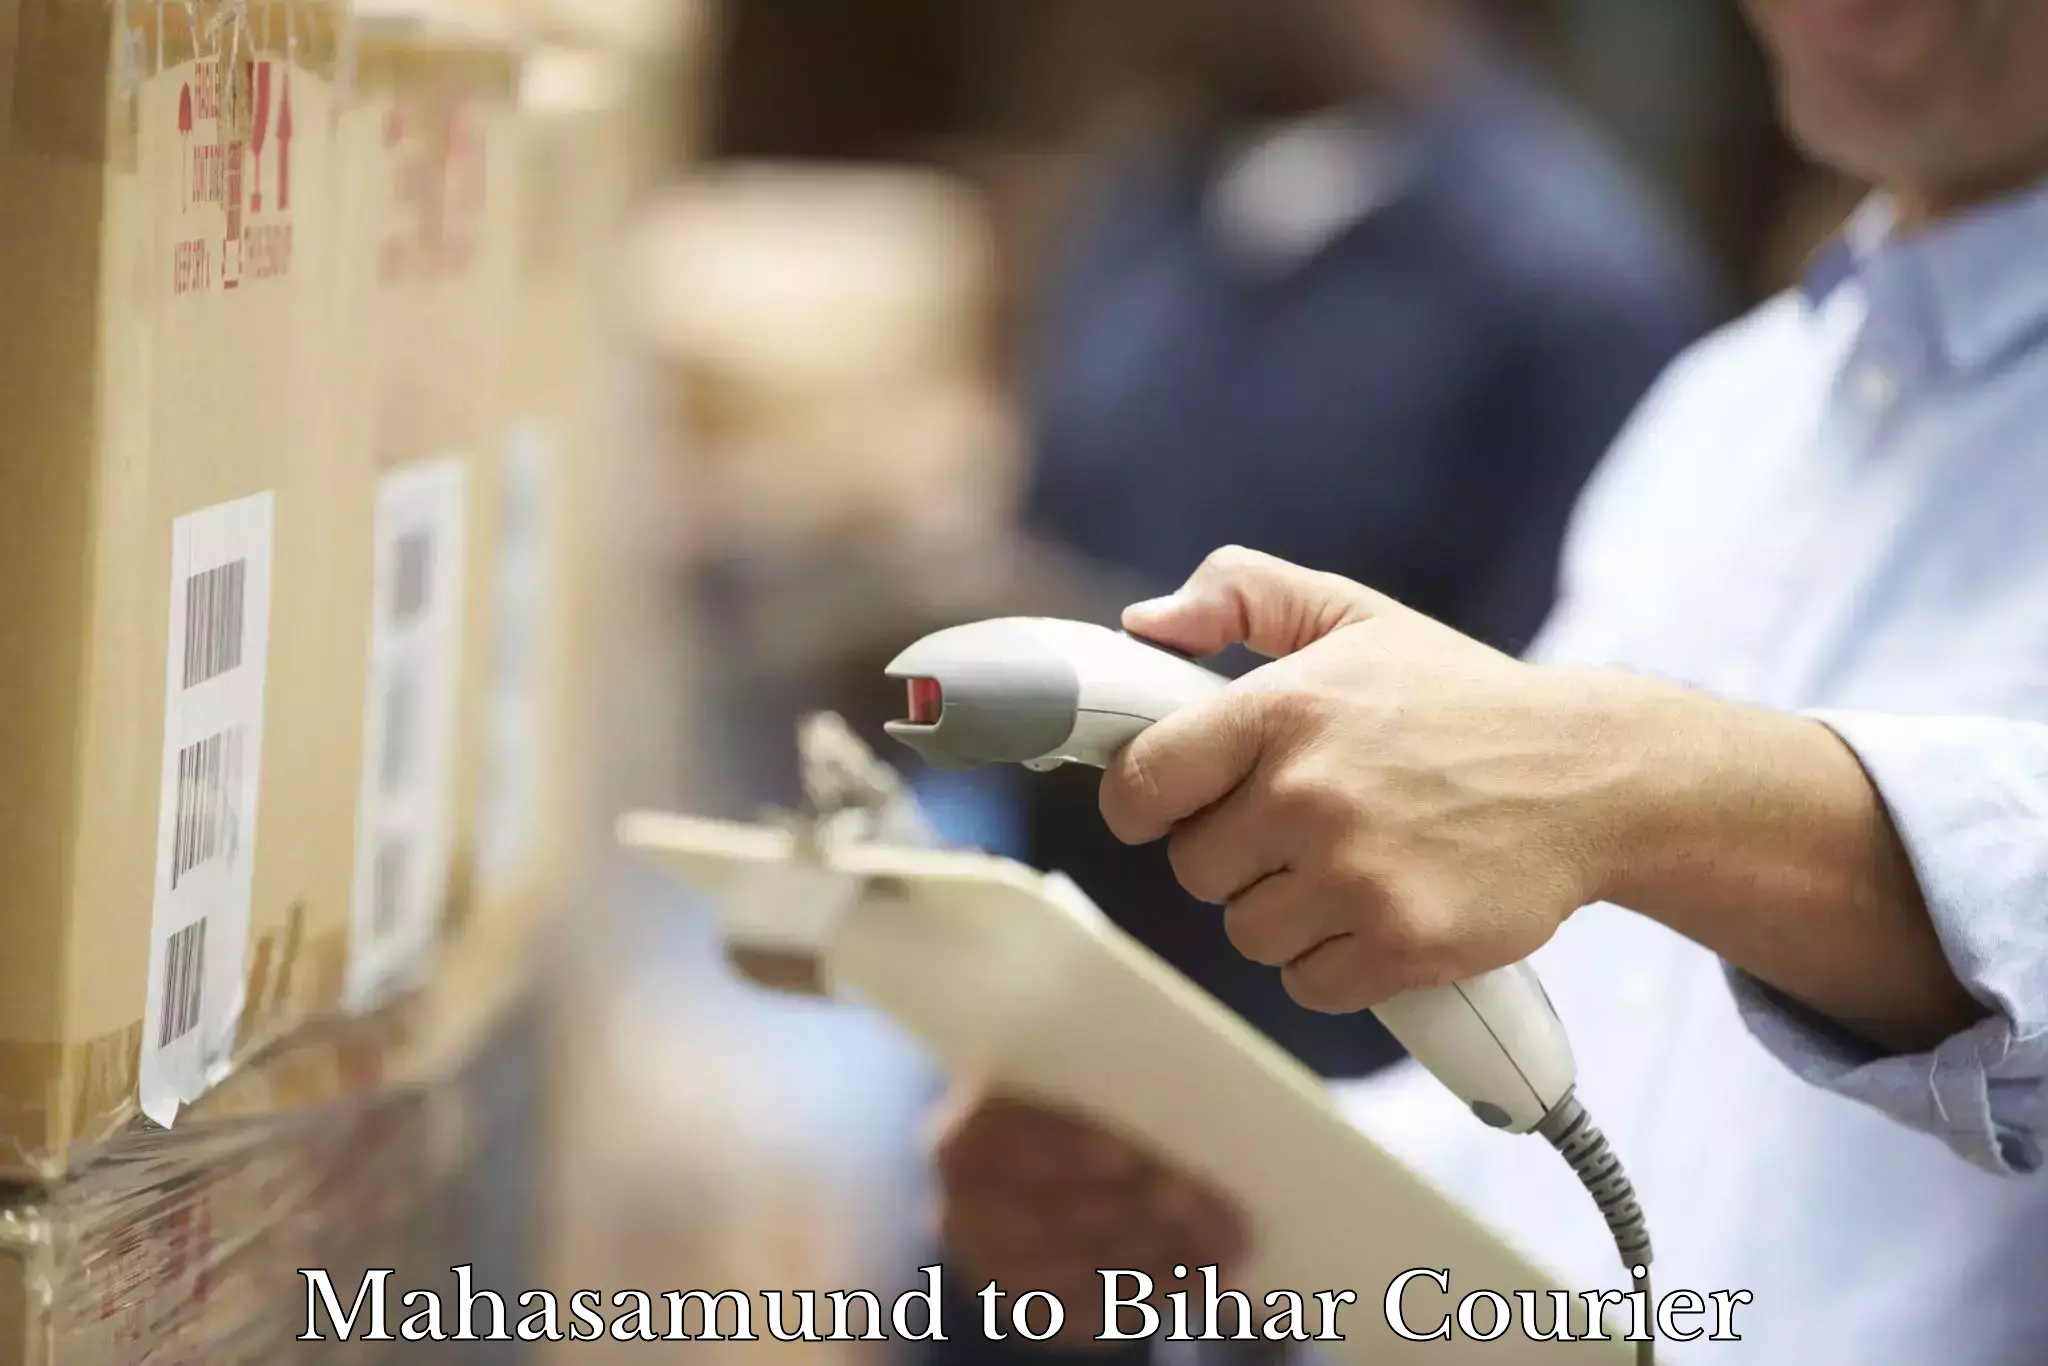 Global courier networks Mahasamund to Bihar